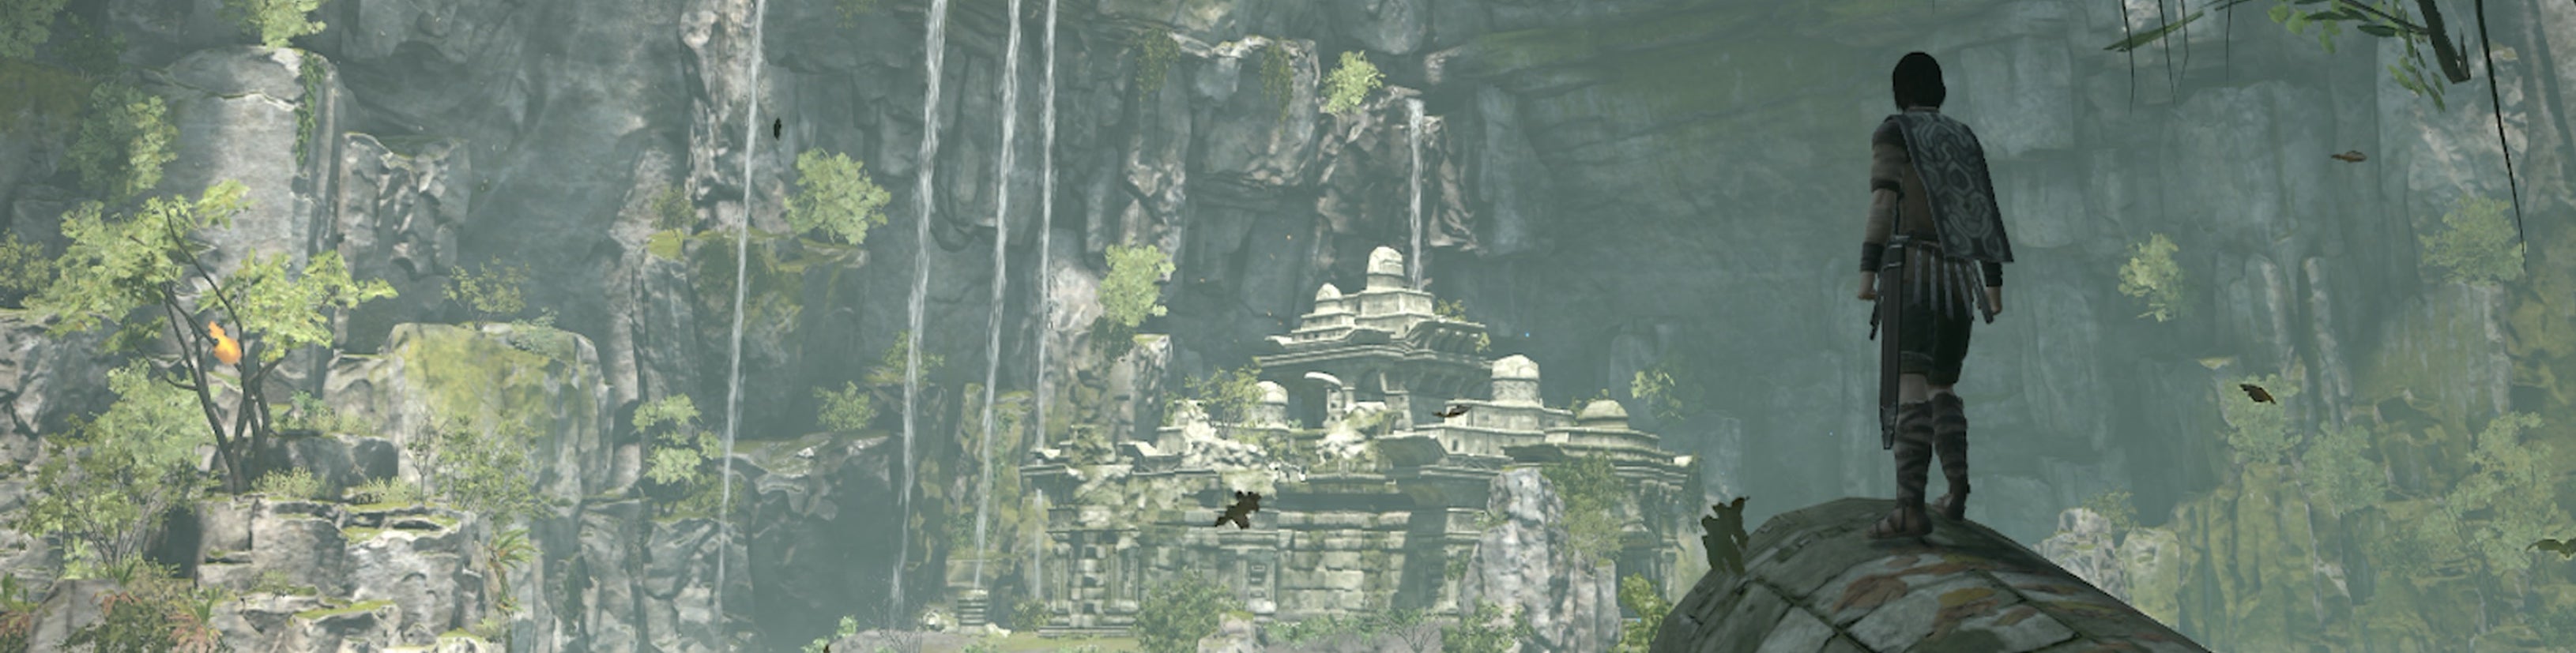 Image for The making of Shadow of the Colossus on PS4